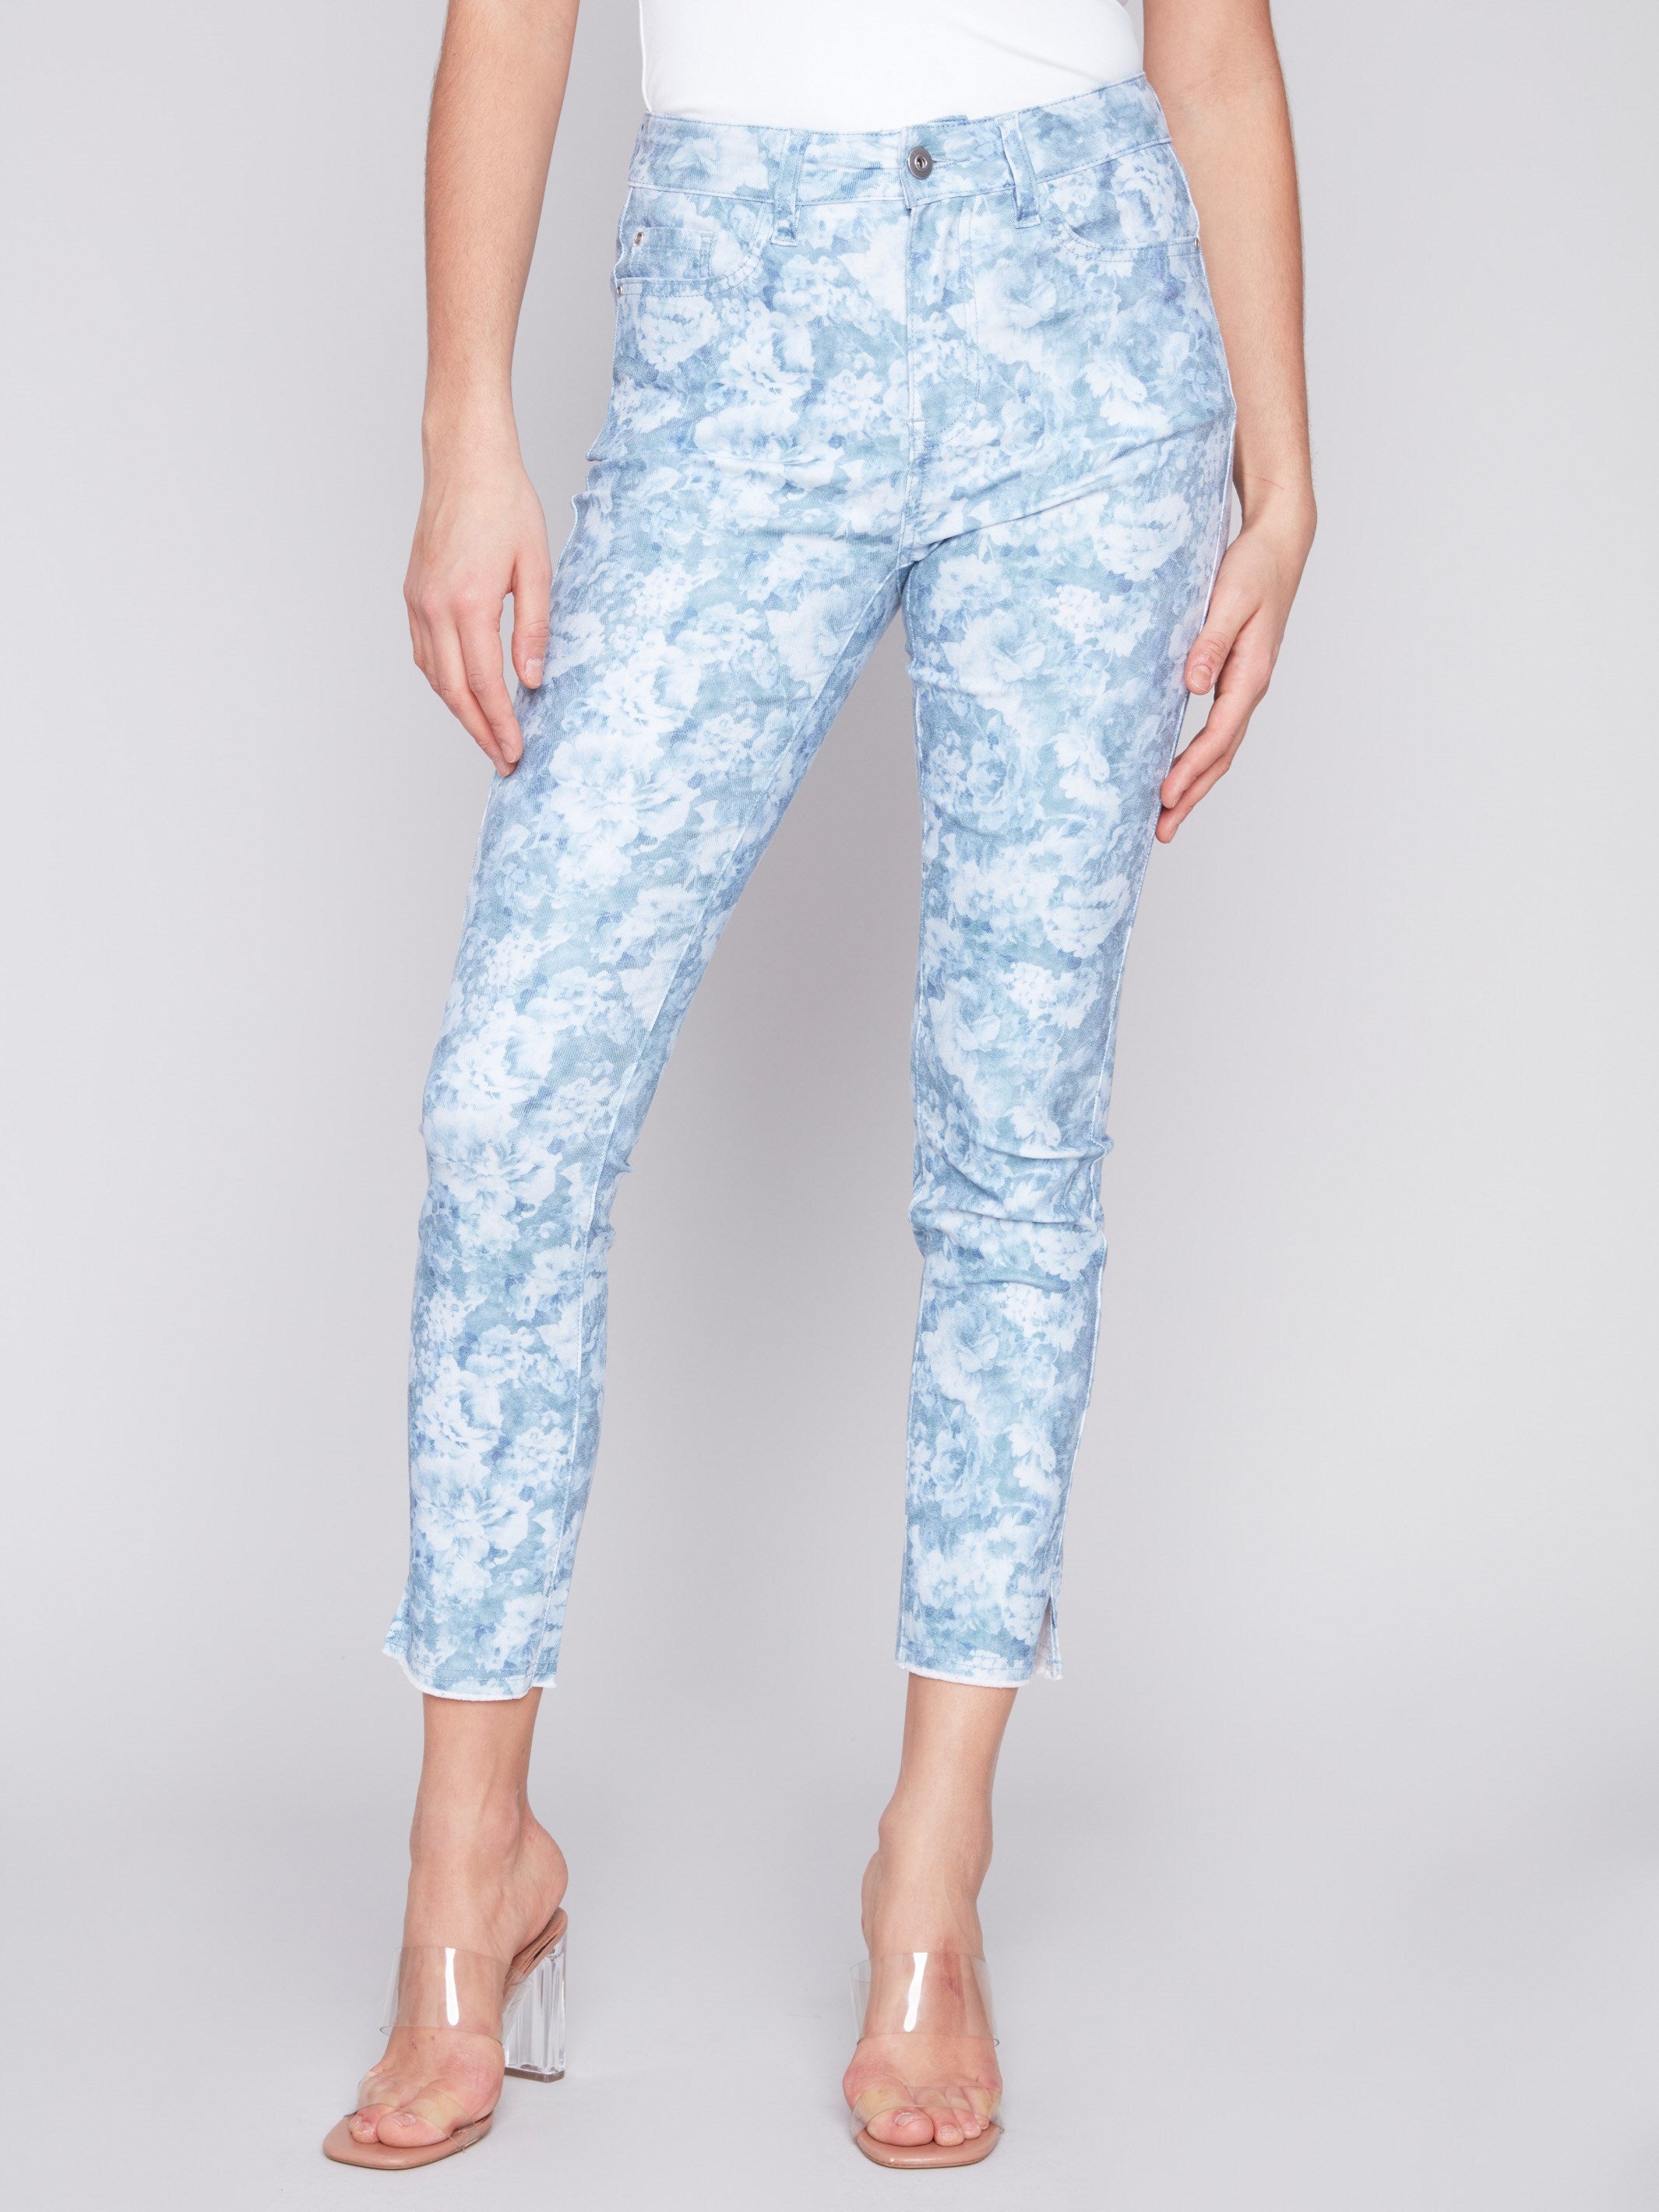 Printed Twill Pants with Hem Slit - Blue Rose - Charlie B Collection Canada - Image 2